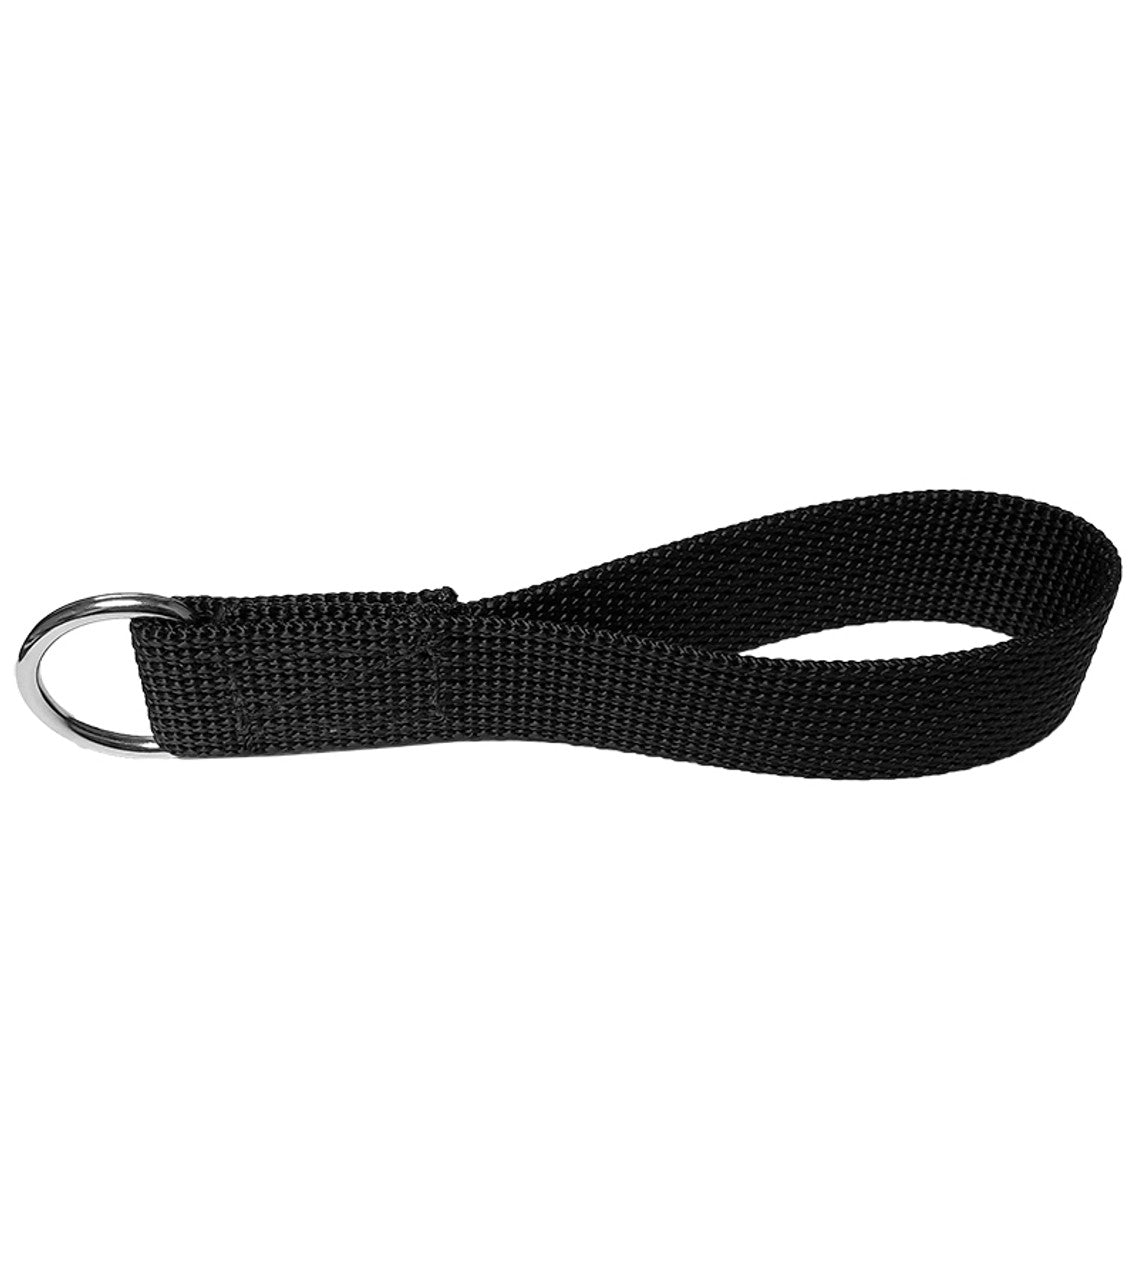 Feather-Weight® D-Ring Strap Replacement for # FW3069 Elastic Girth